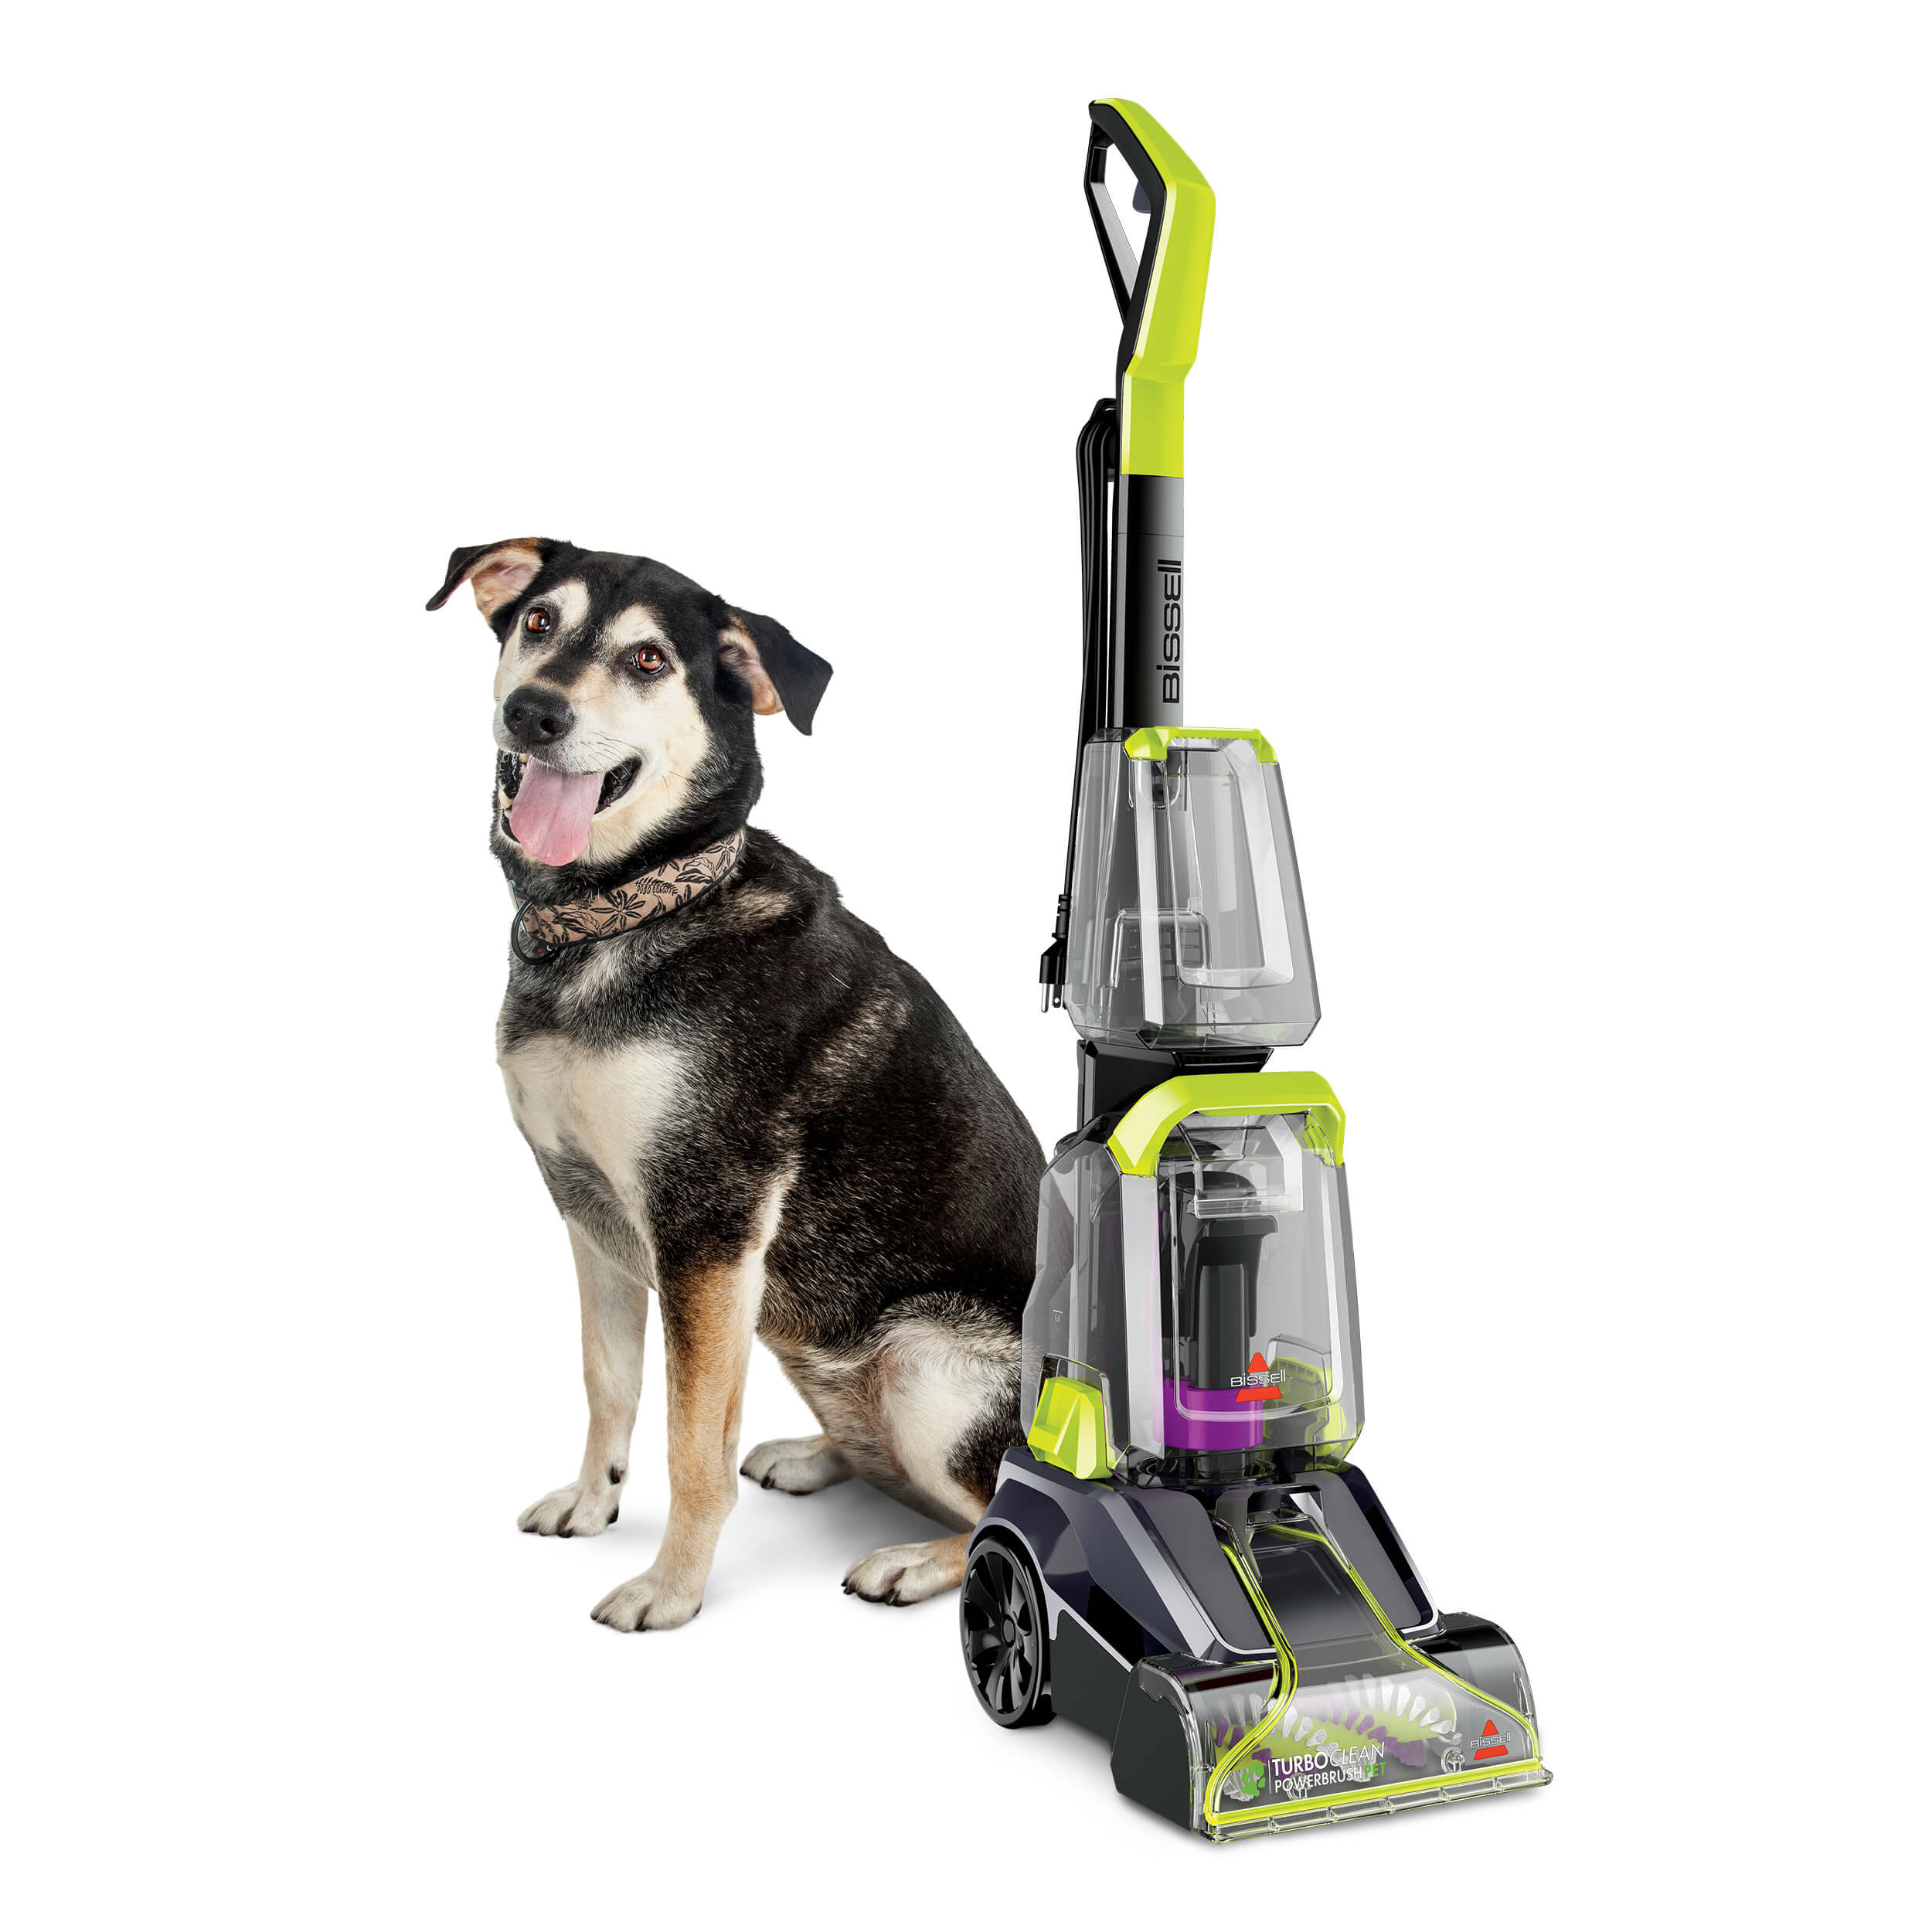 Best Buy: BISSELL TurboClean™ PowerBrush Pet Carpet Cleaner Titanium with  ChaCha Lime Accents 2085